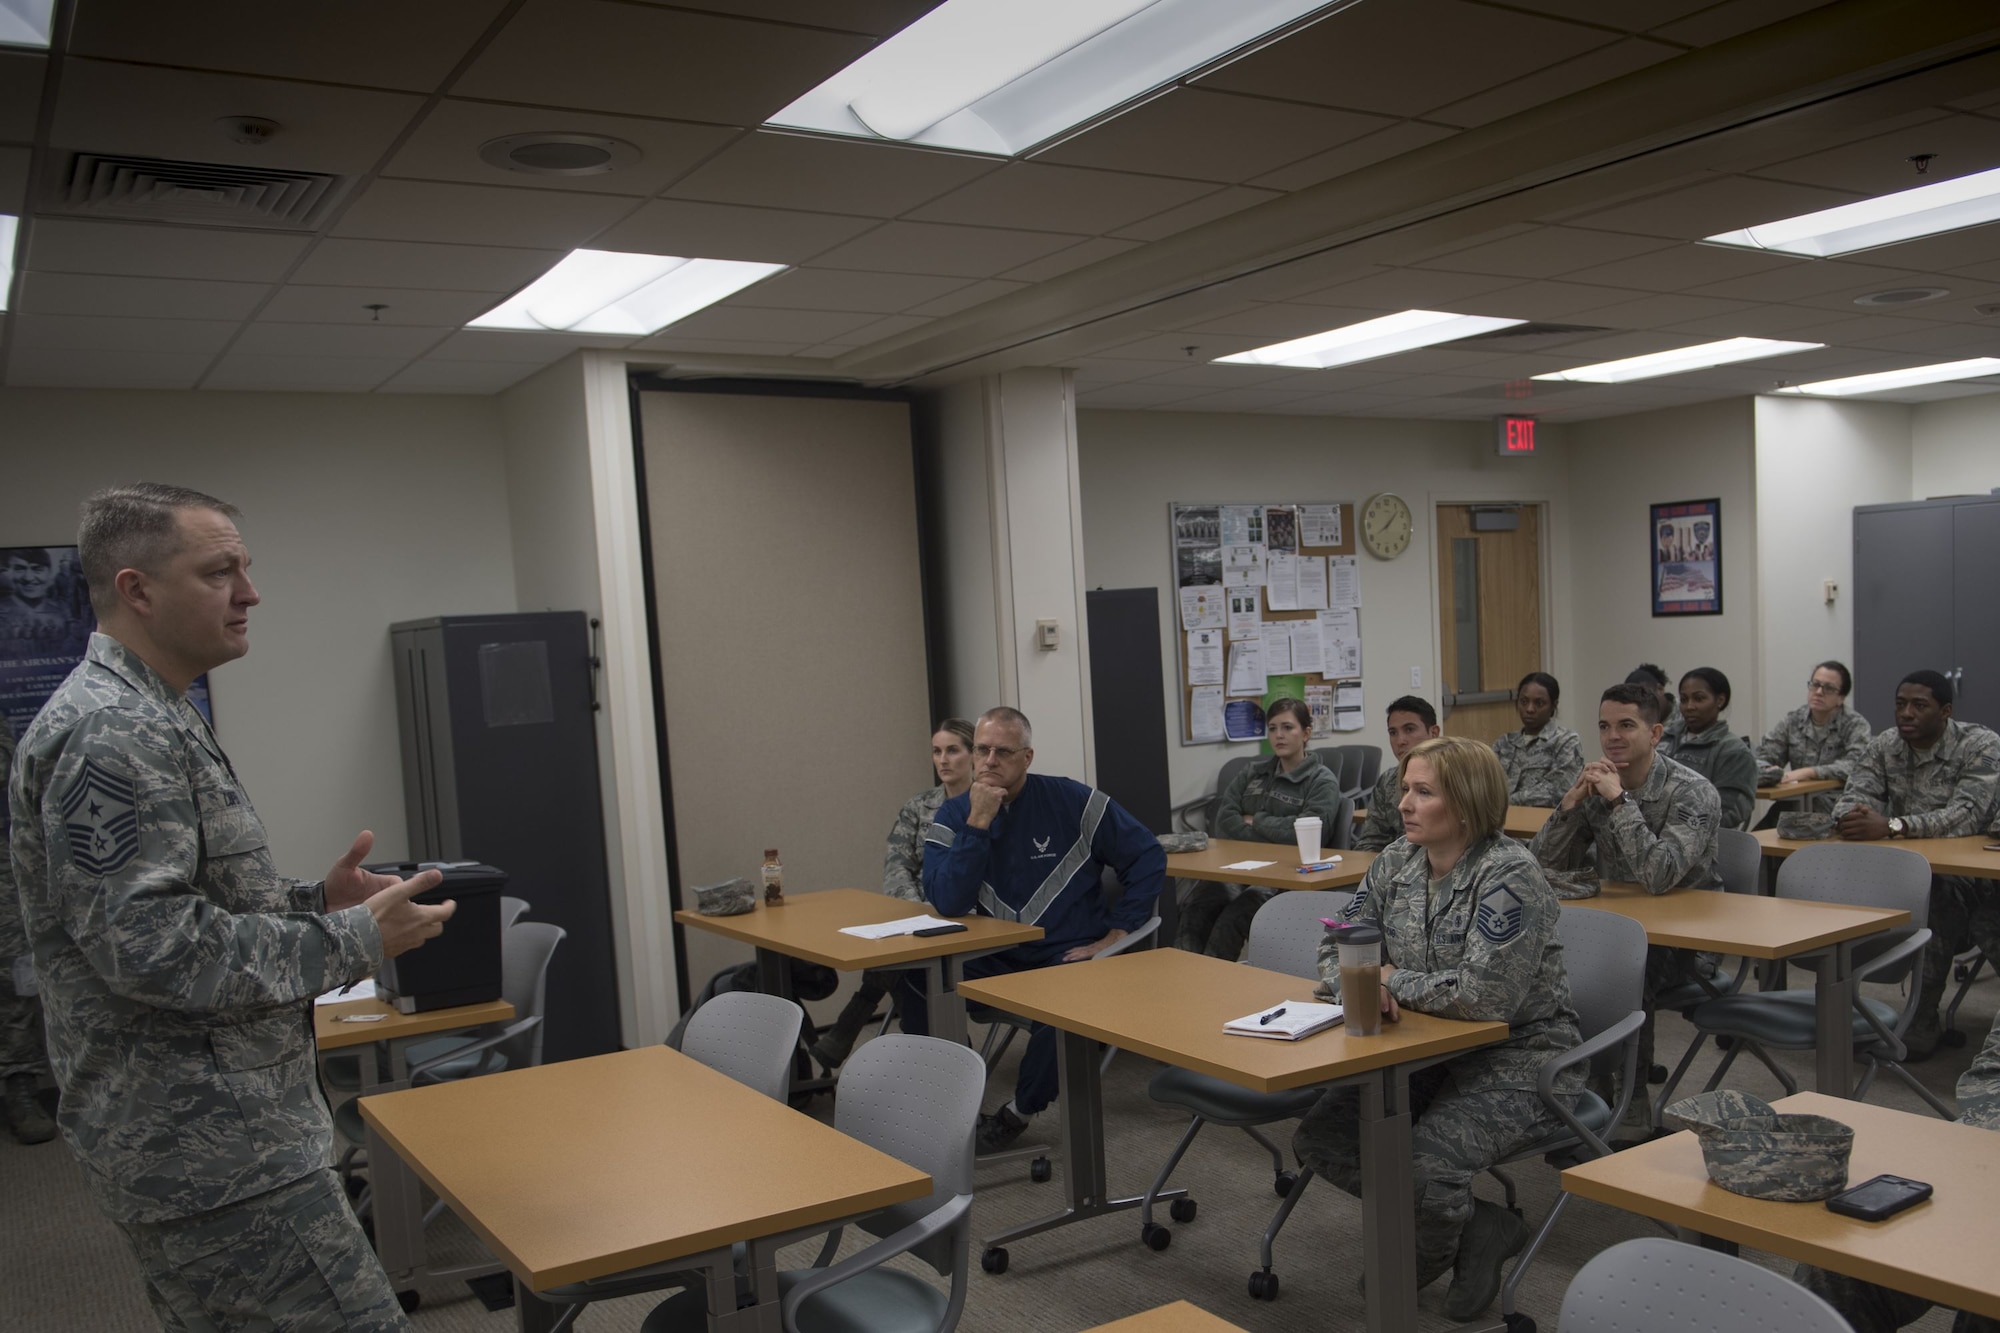 Chief Master Sgt. James W. Loper, 10th Air Force command chief master sergeant, answers questions from Airmen assigned to the 476th Aeromedical Medicine Flight, Jan. 7th, at Moody Air Force Base, Ga. The 10th Air Force leadership visited Moody to discuss the future deployments and changes to their units. (U.S. Air Force photo by Senior Airman Daniel Snider)